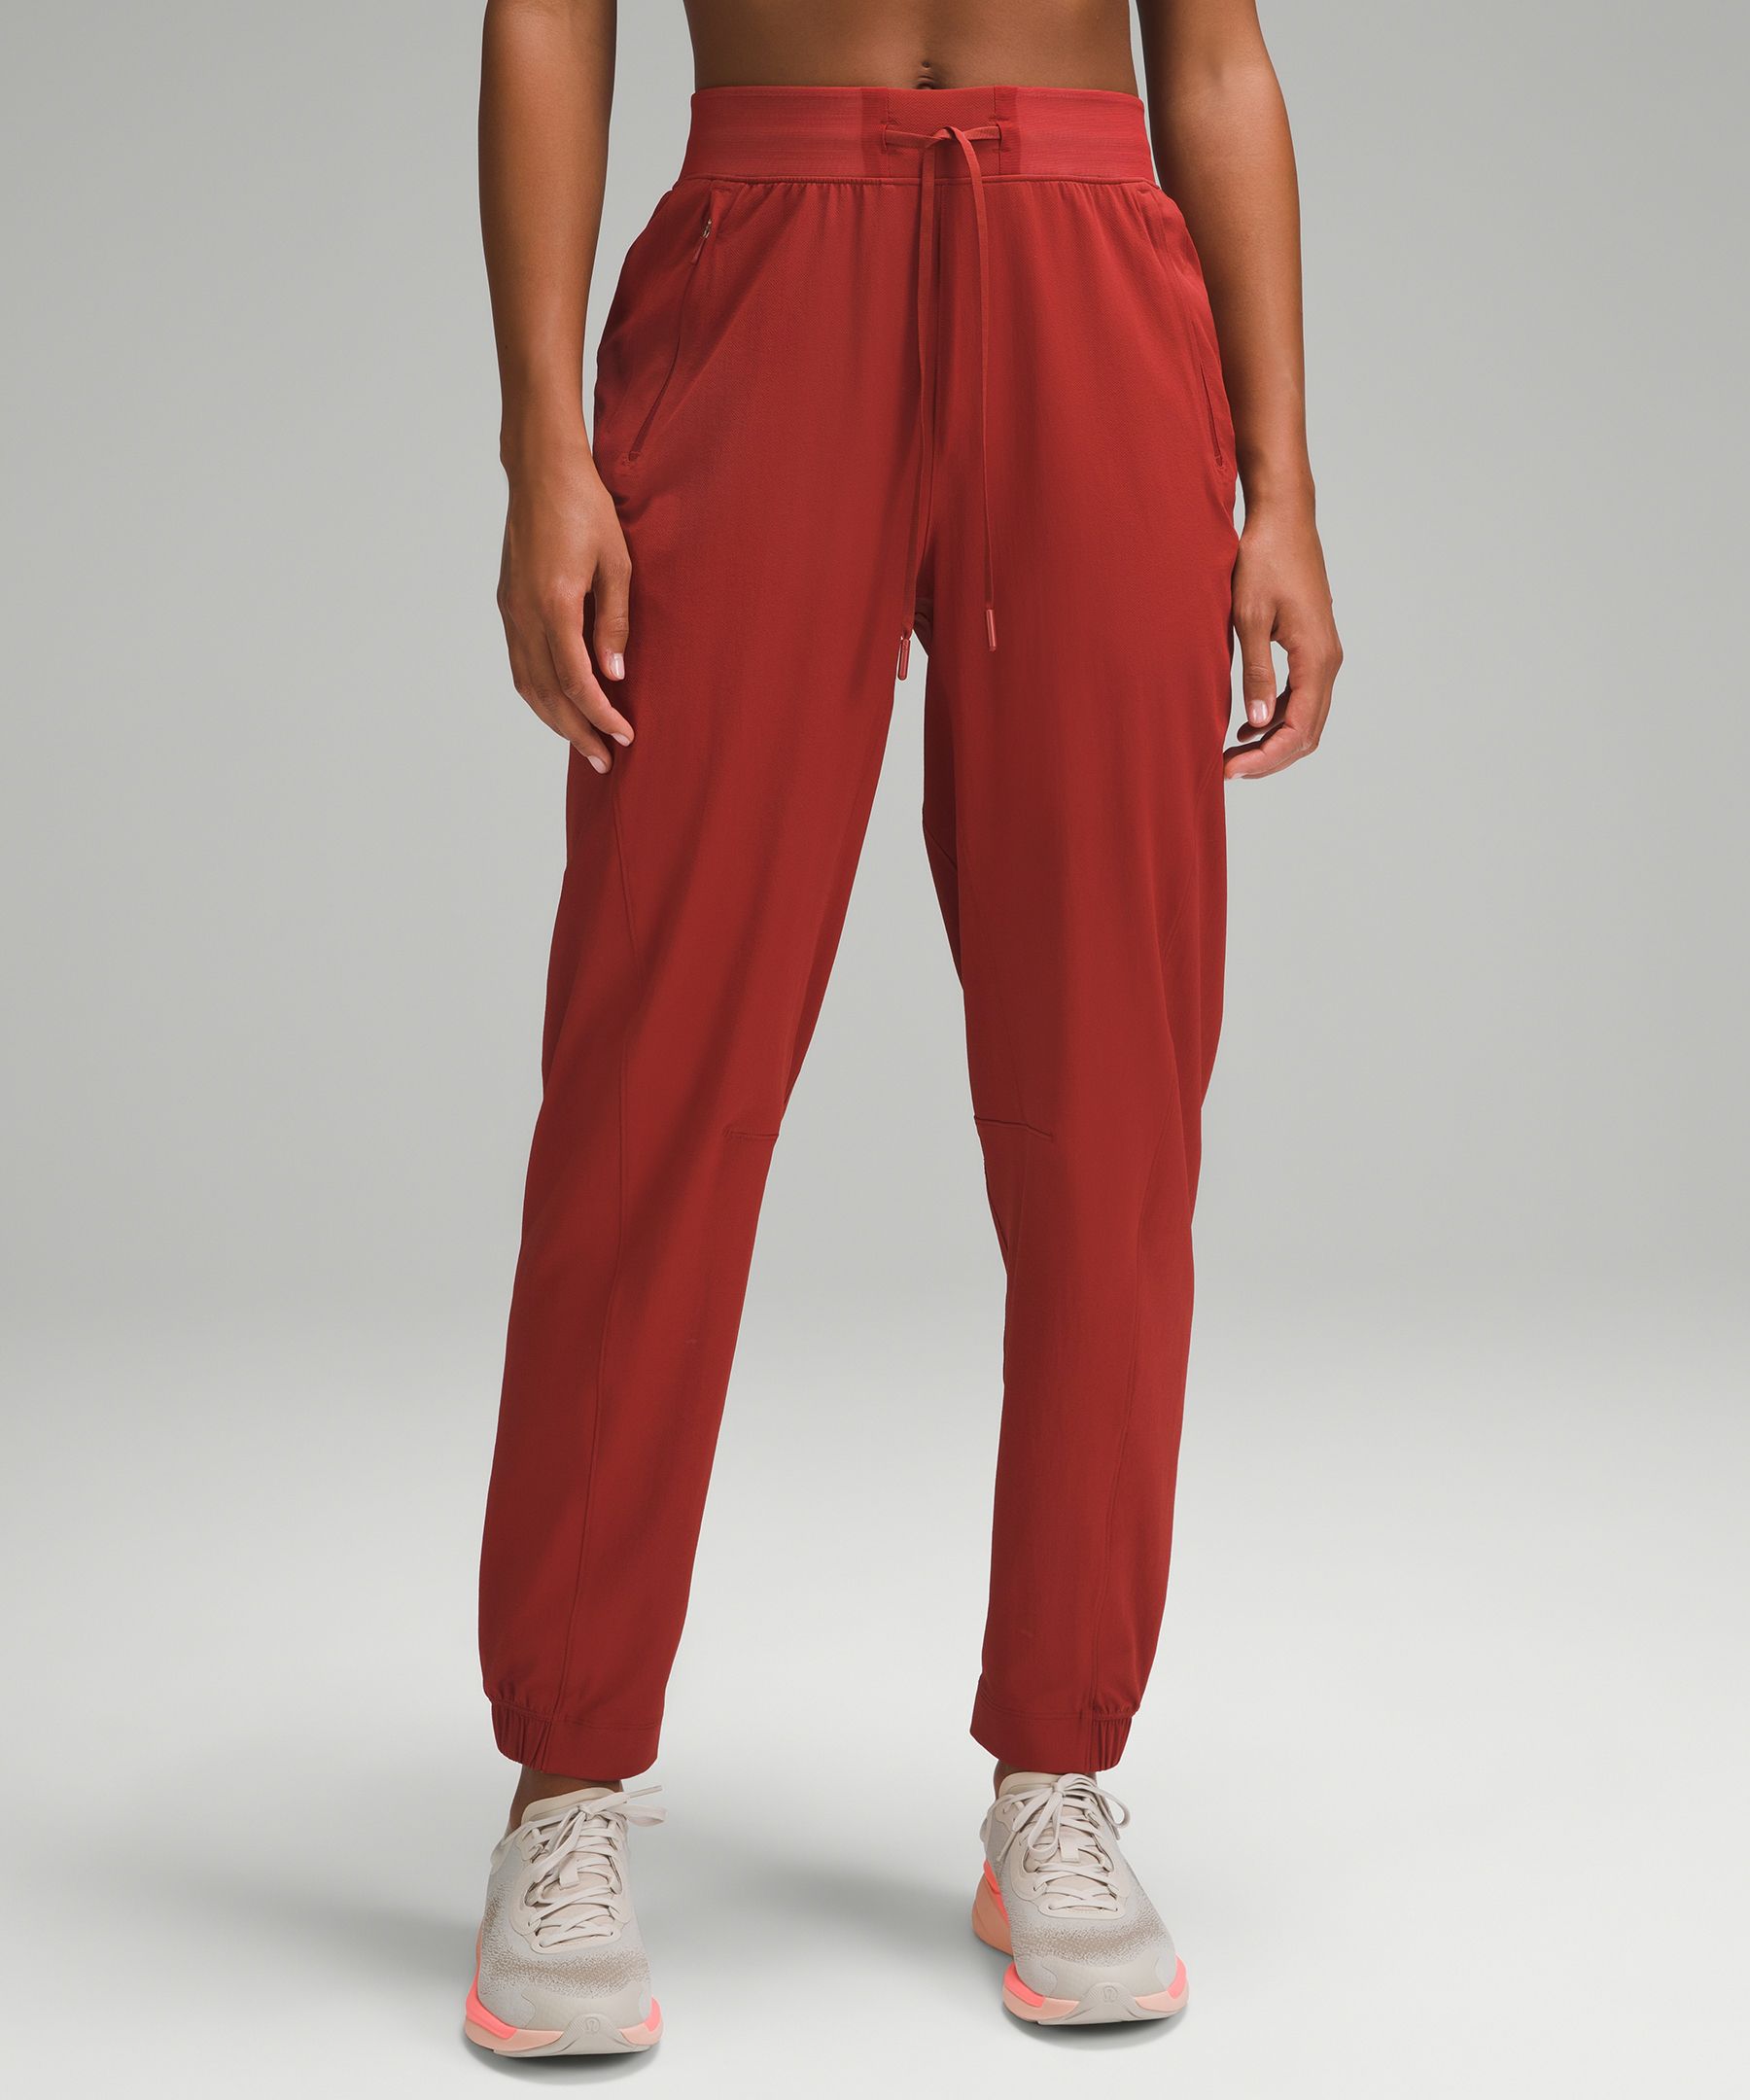 License to Train High-Rise Pant | Women's Joggers | lululemon